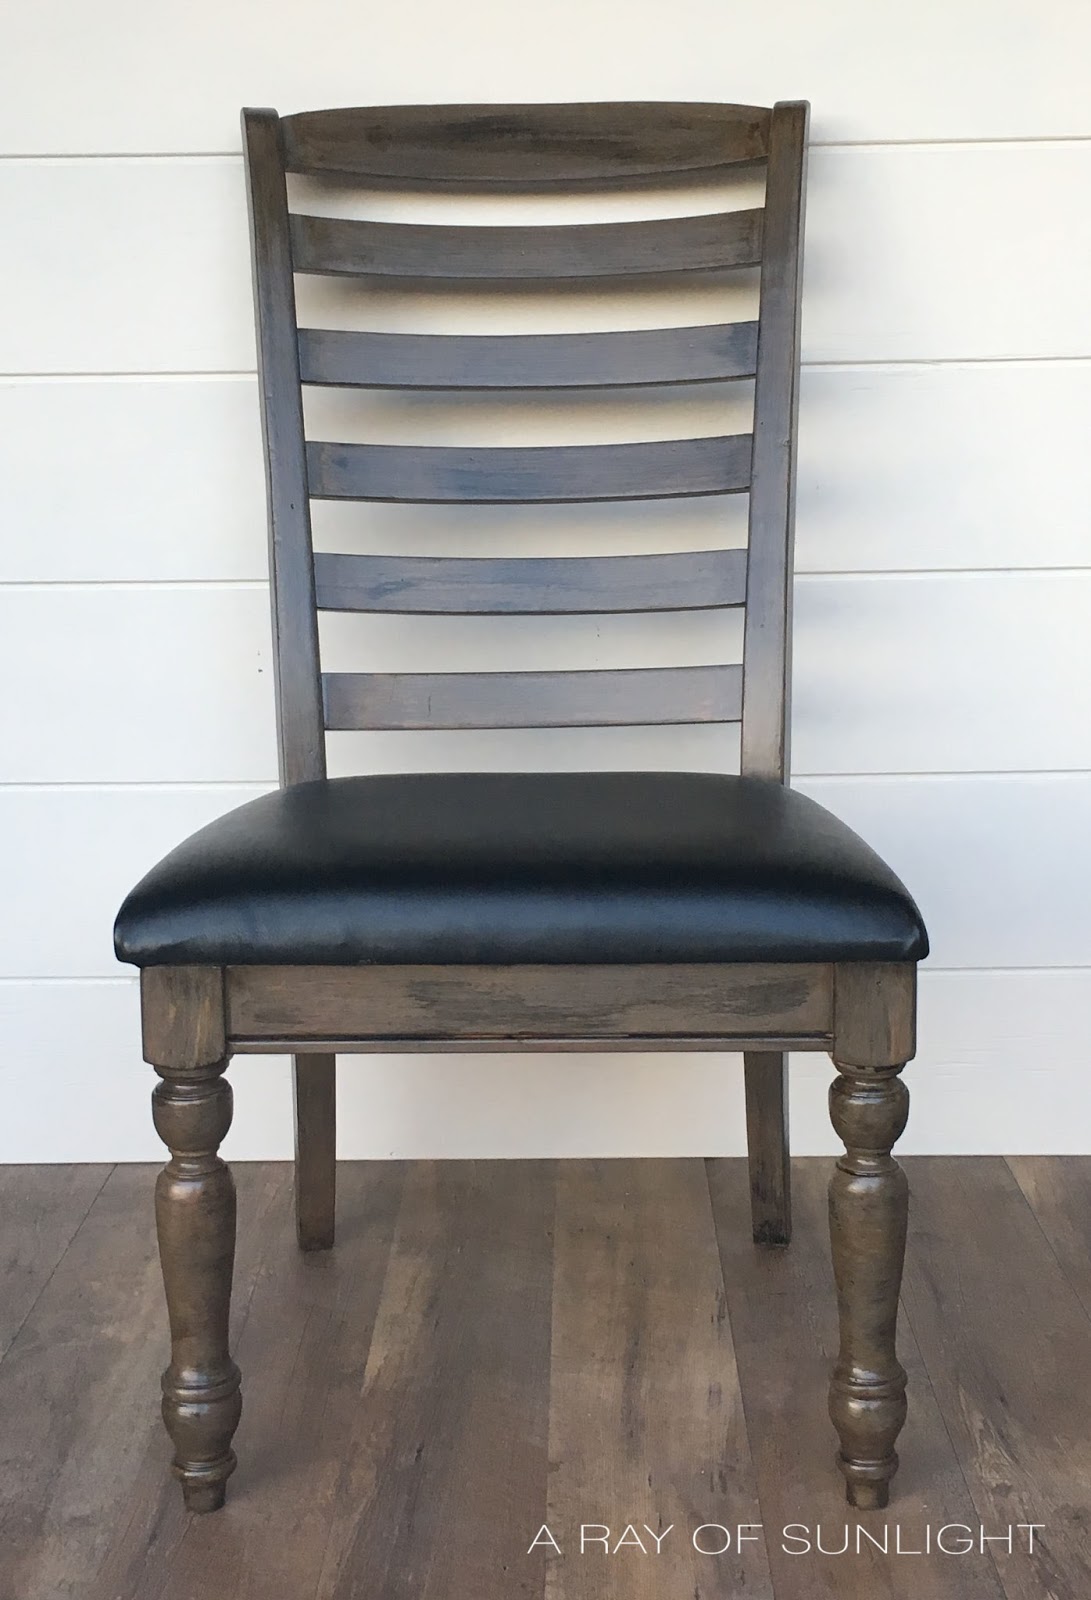 Chair after restoration hardware weathered finish with paint and reupholstered with black vinyl seat